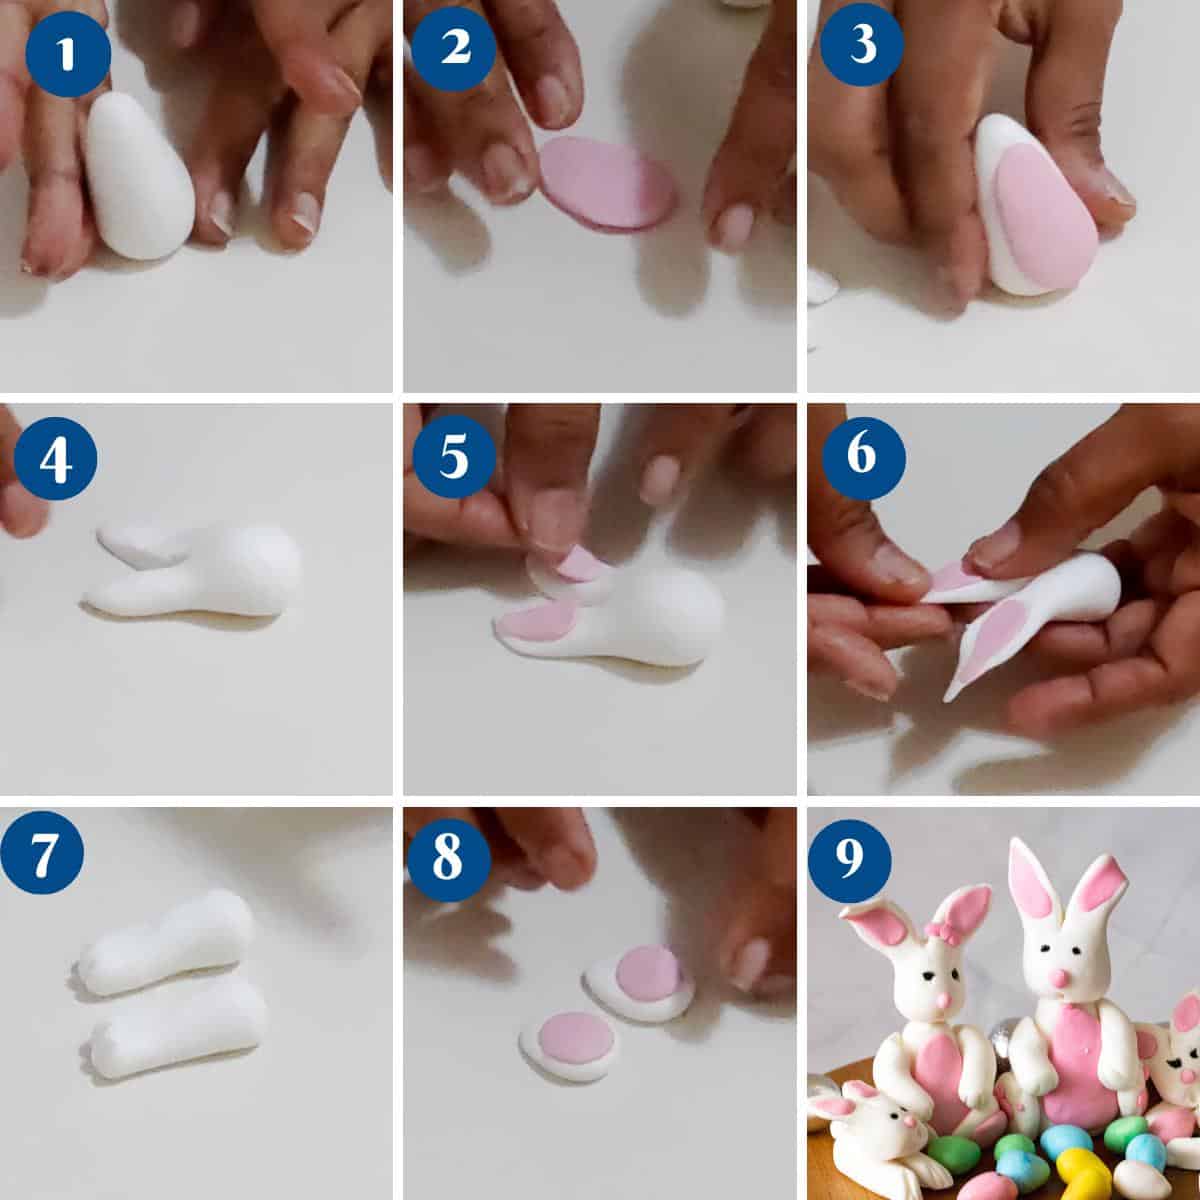 Progress pictures making the gum paste bunny.